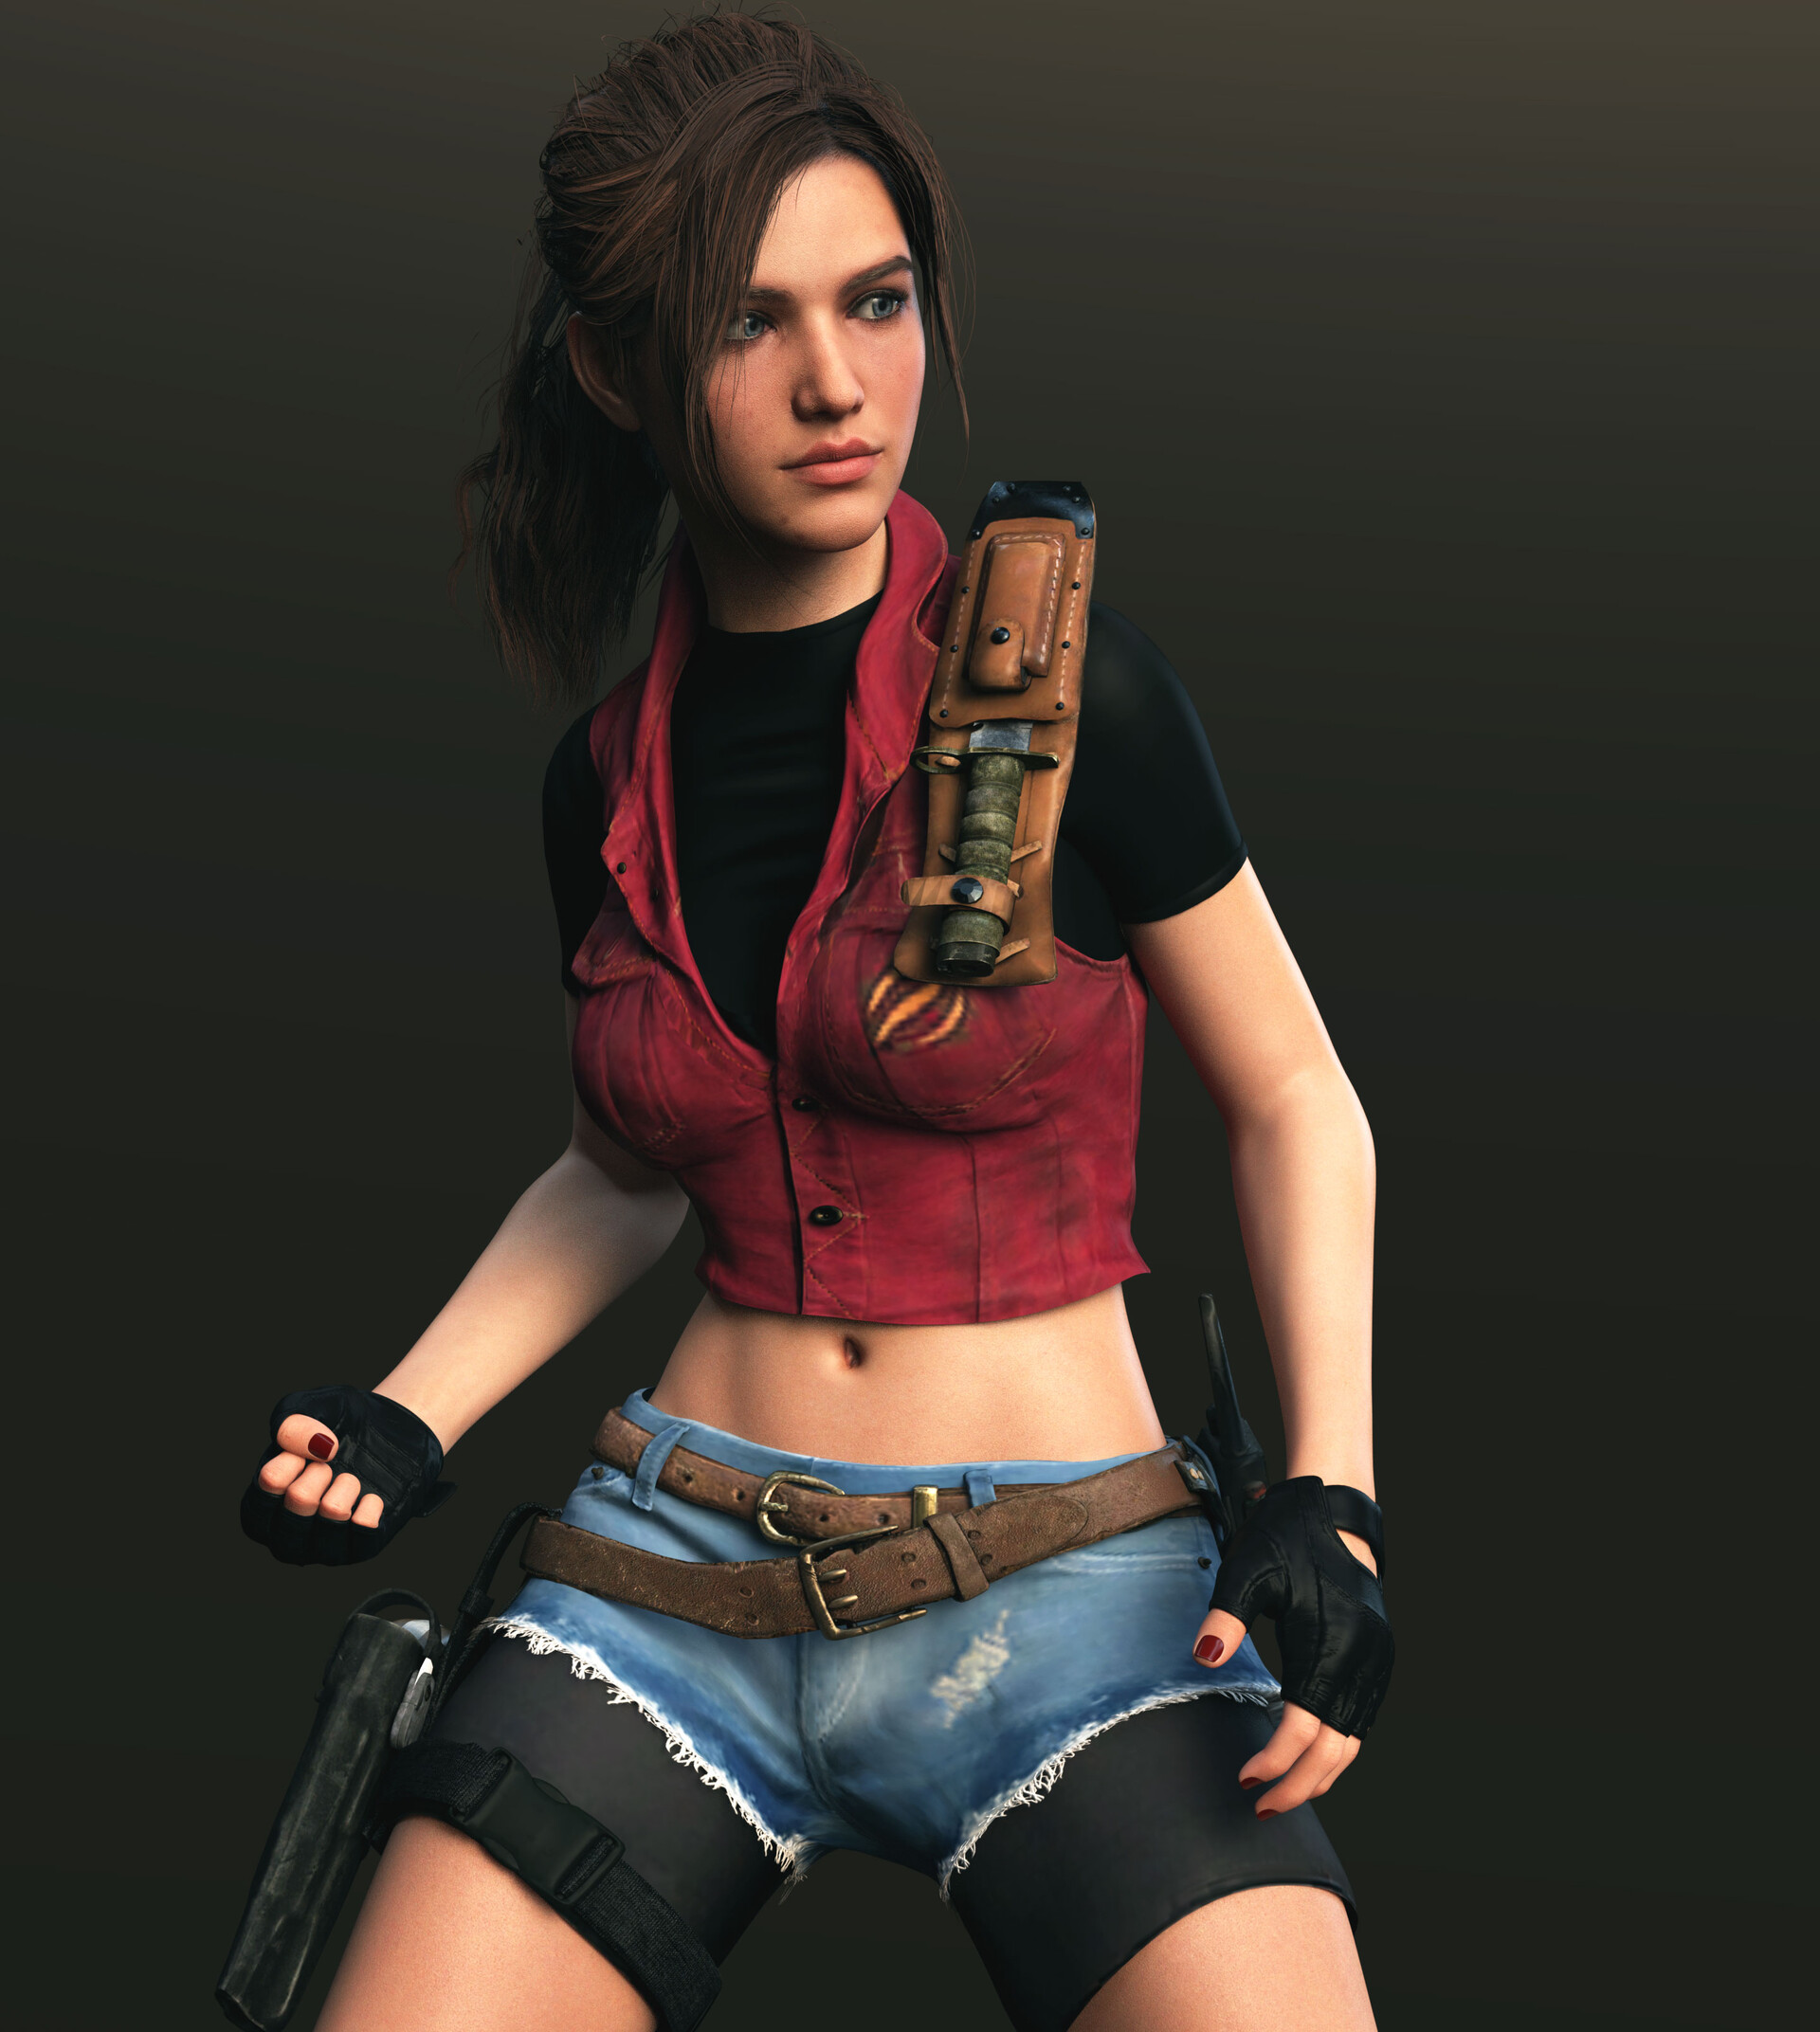 ArtStation - Claire Redfield (Resident Evil character)